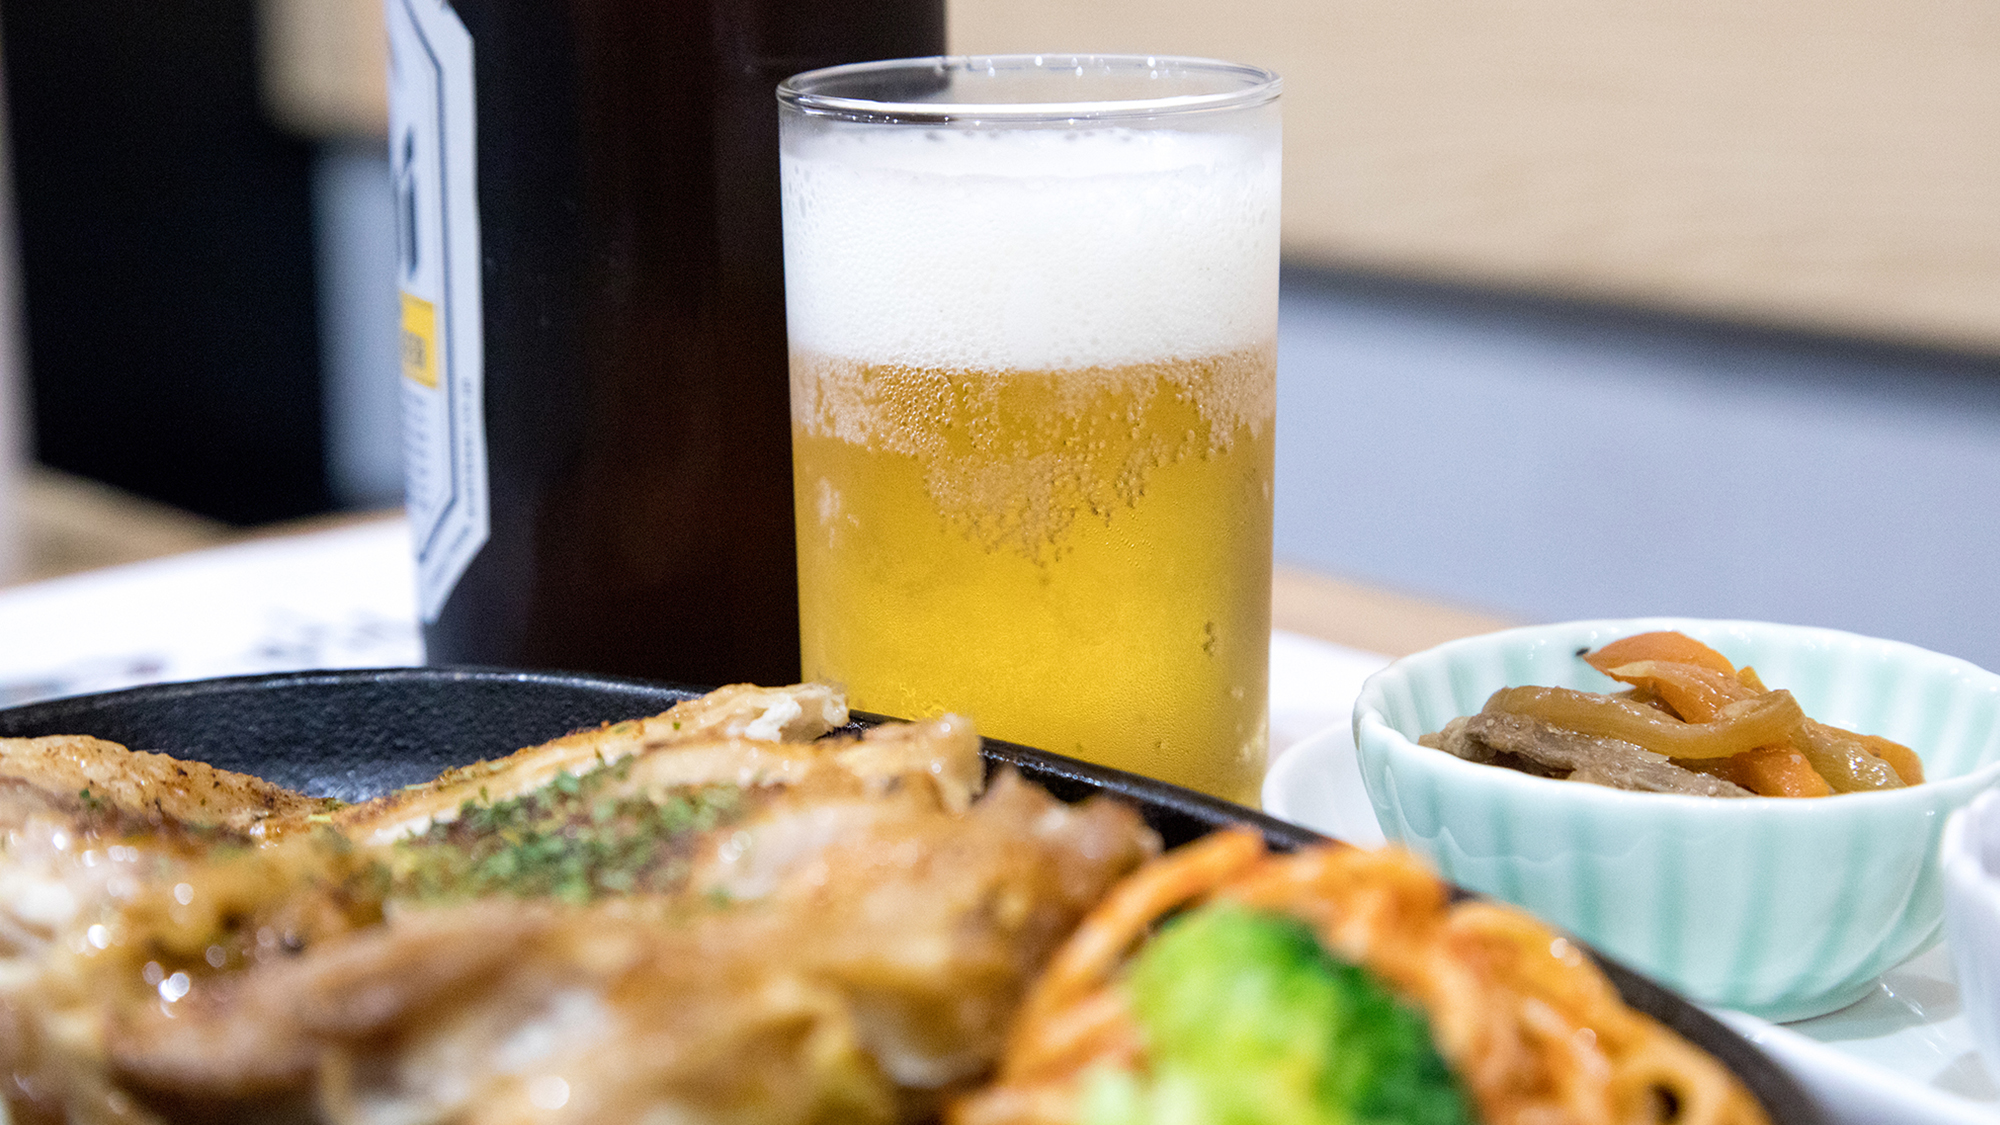 ★【LOVE BEER】瓶ビールがセット！朝夕２食付き♪プラン☆Wi-Fi接続無料